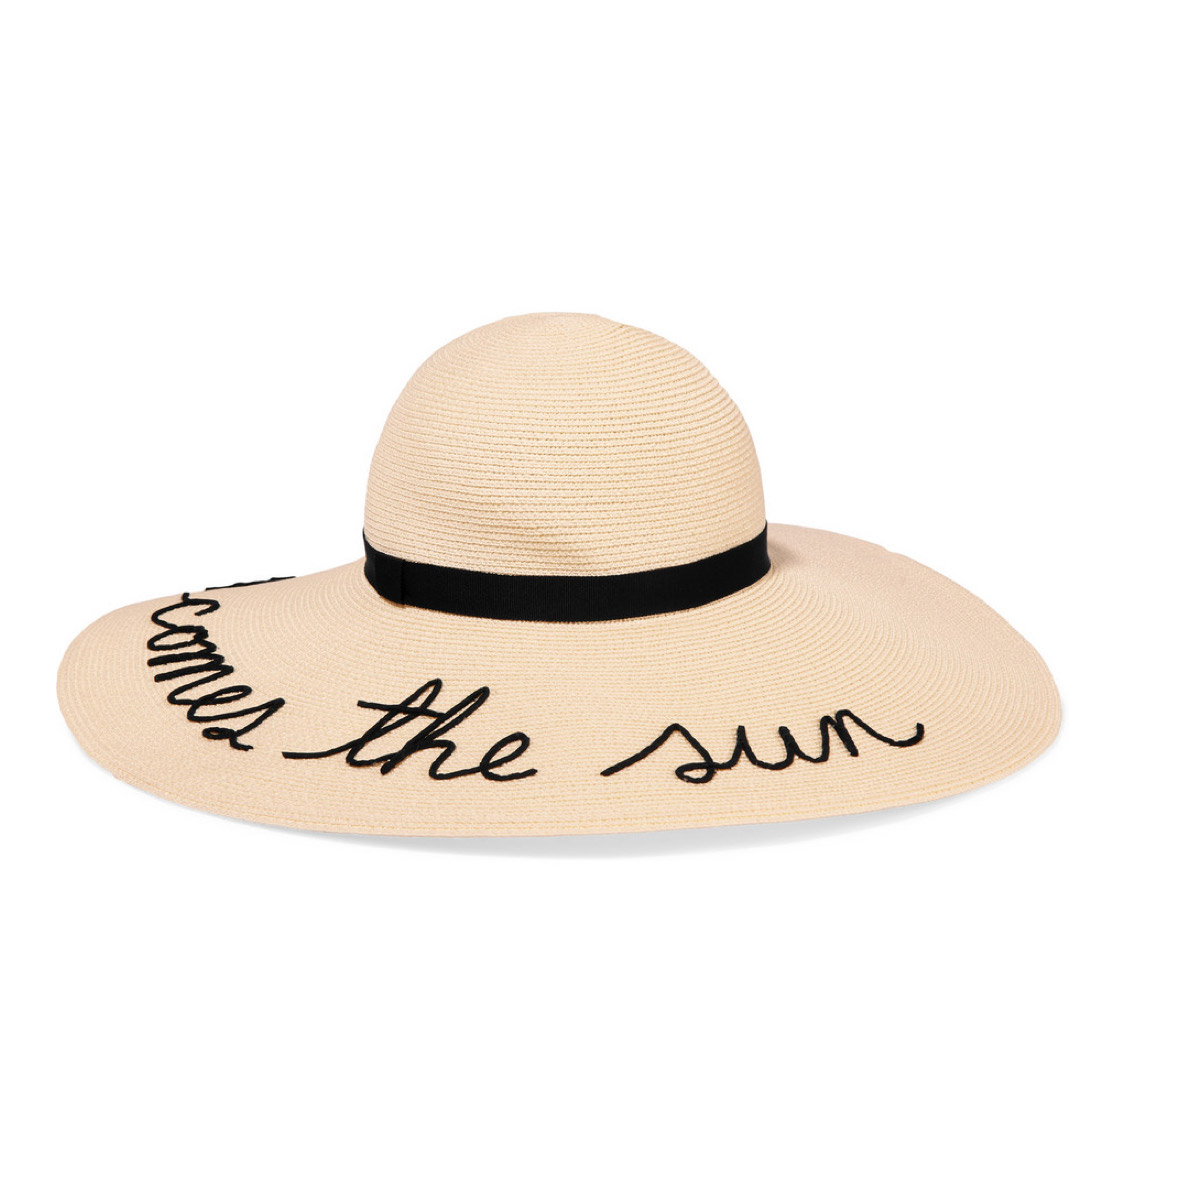 Bunny Embroidered Sunhat